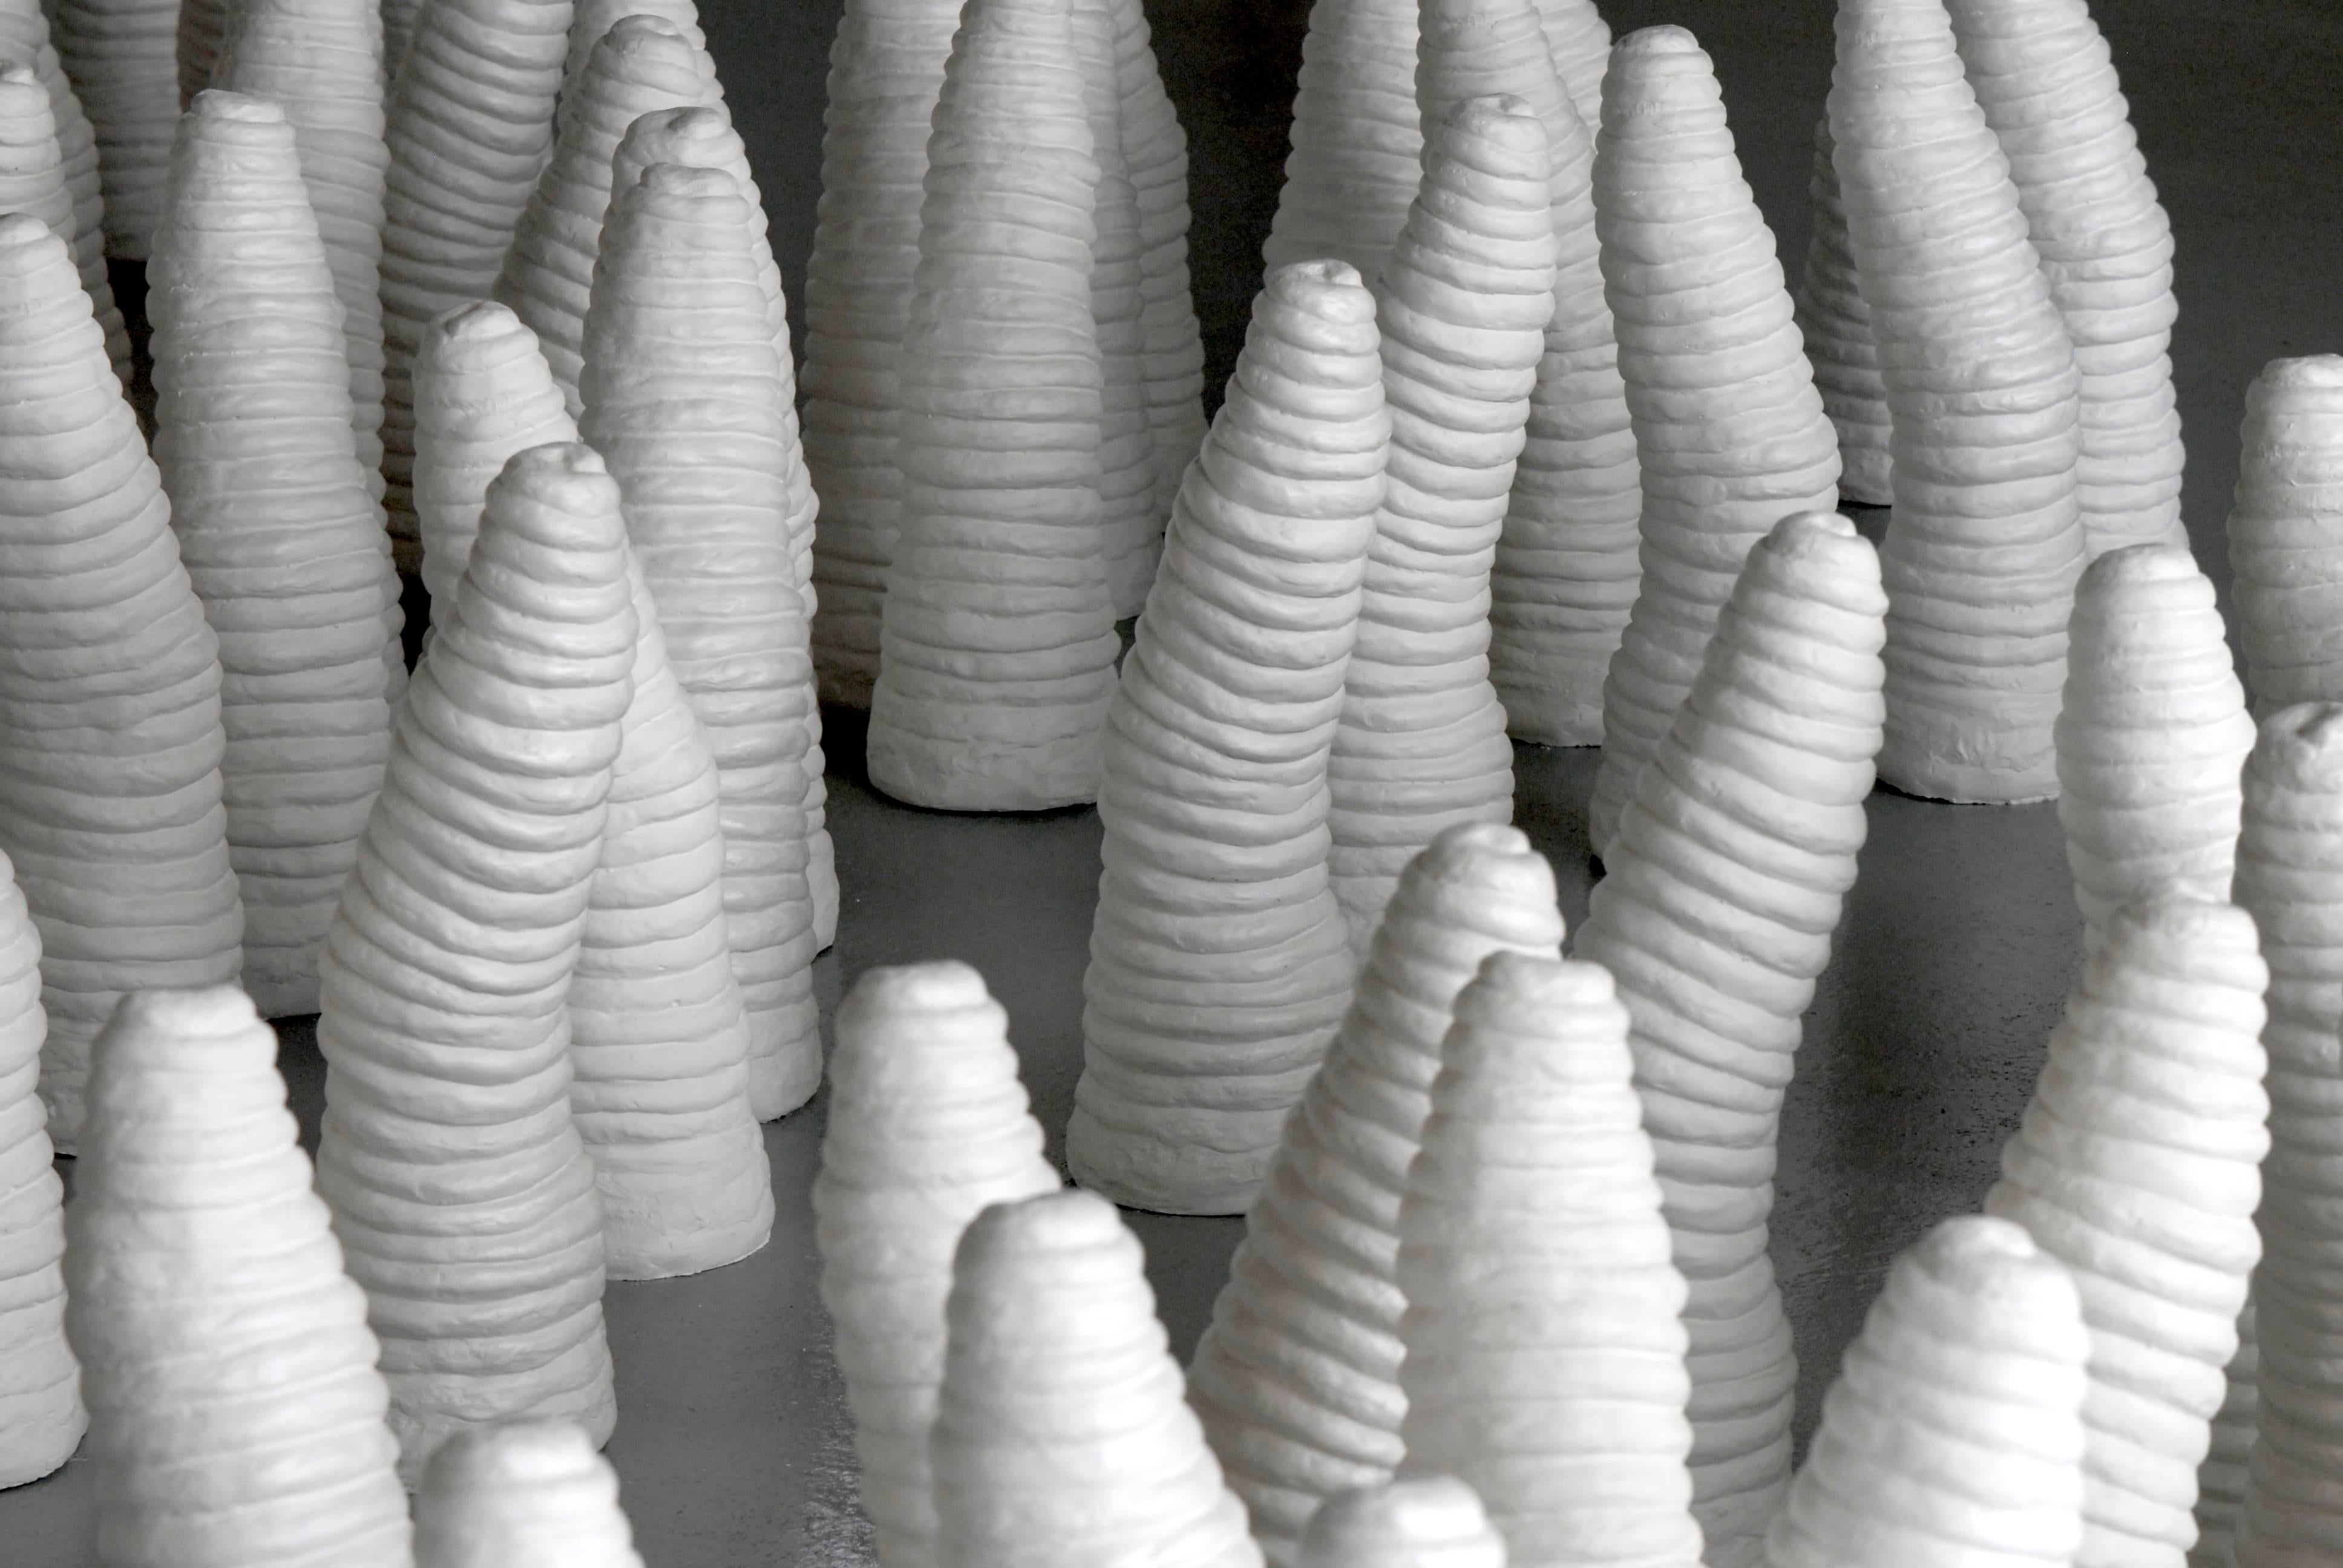 In Sylvia Schwartz' structures, silicone molds are cast from both natural and hand-made forms, including clay coils, volcanic rock patterns, seaweed, and her own fingerprints.

The human trace is apparent through the repetition of shapes and